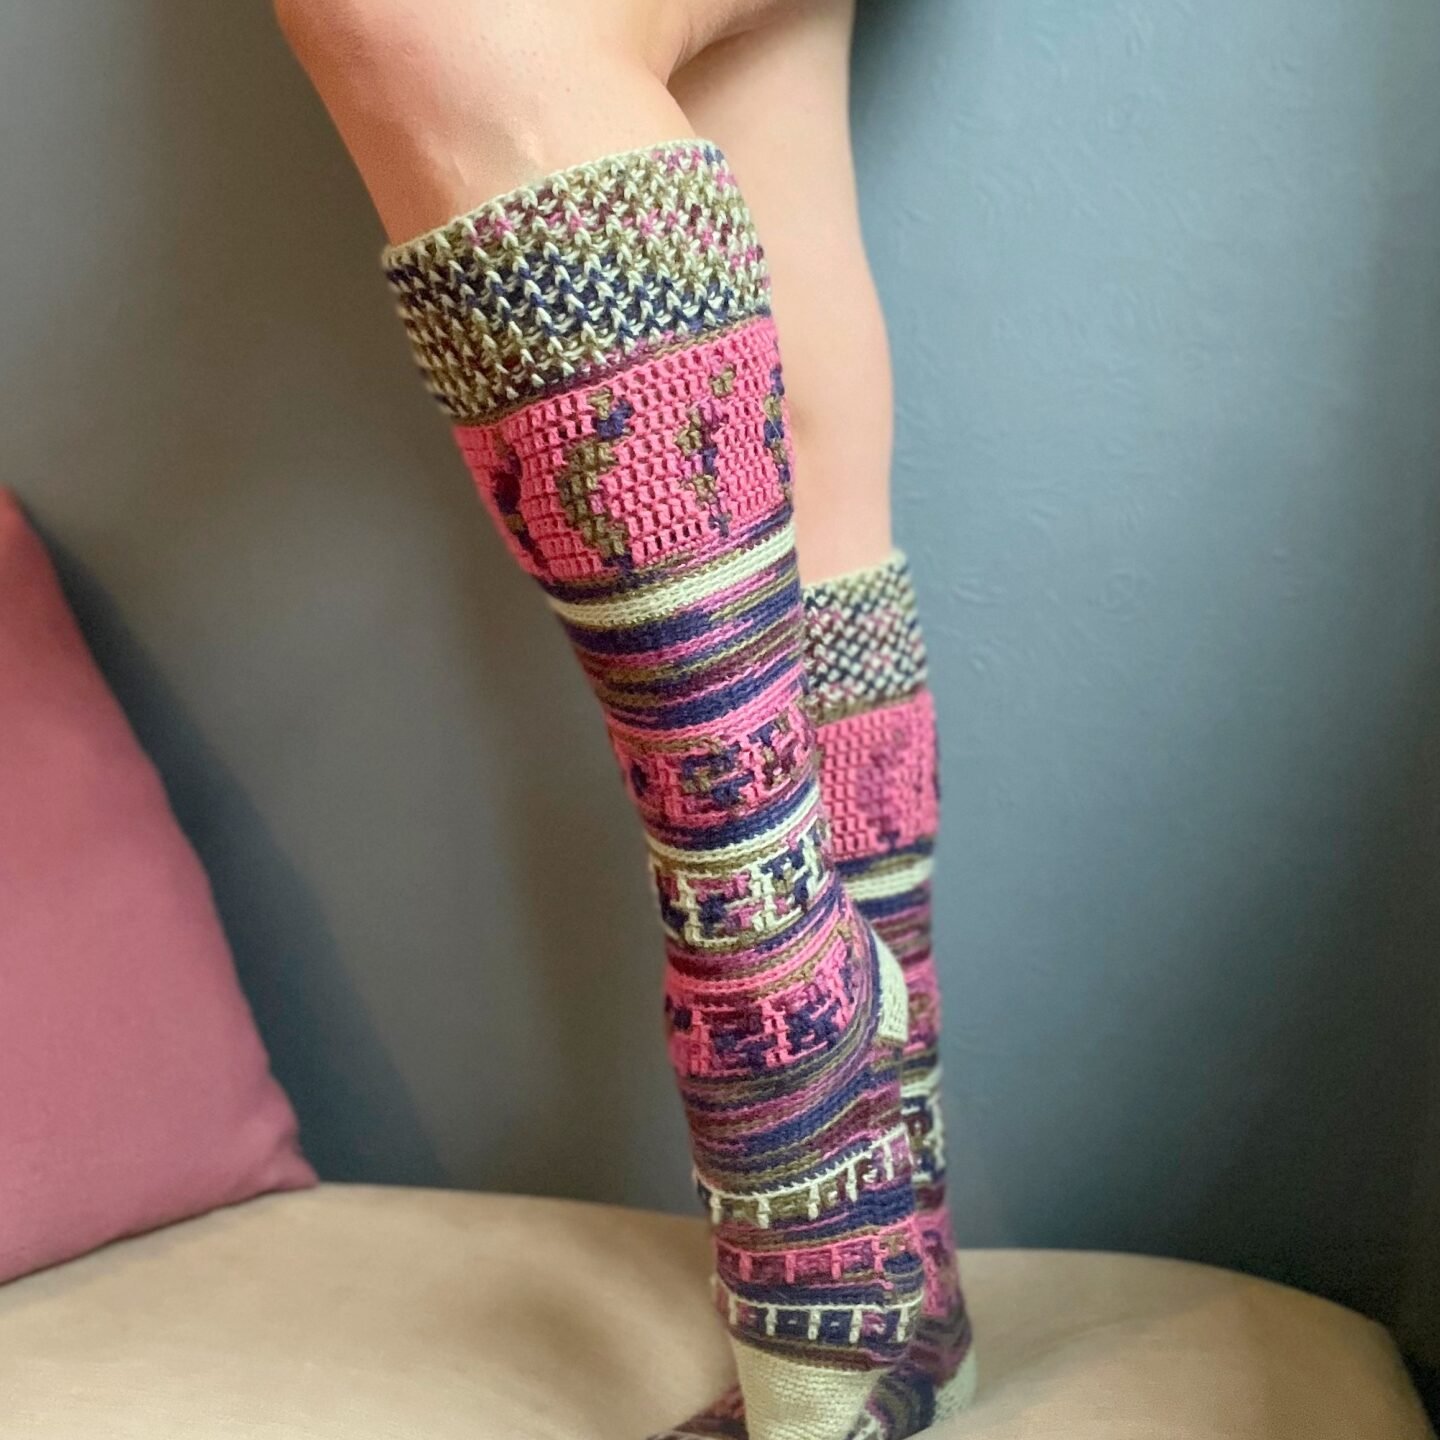 Knee high crochet socks with a gray background and a pink pillow nearby.